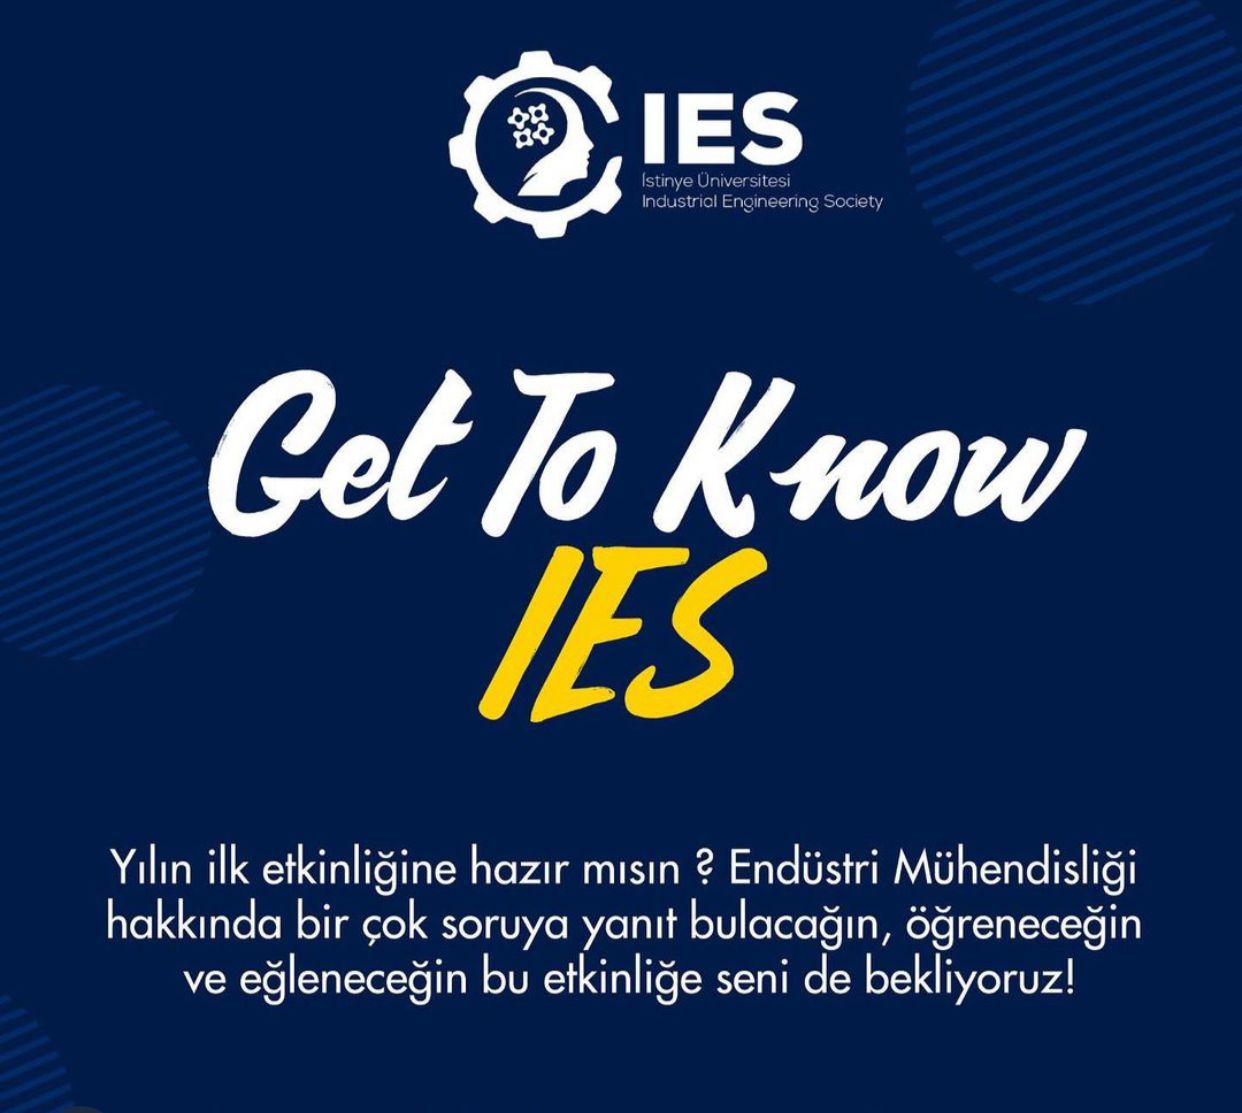 Get To Know Ies!